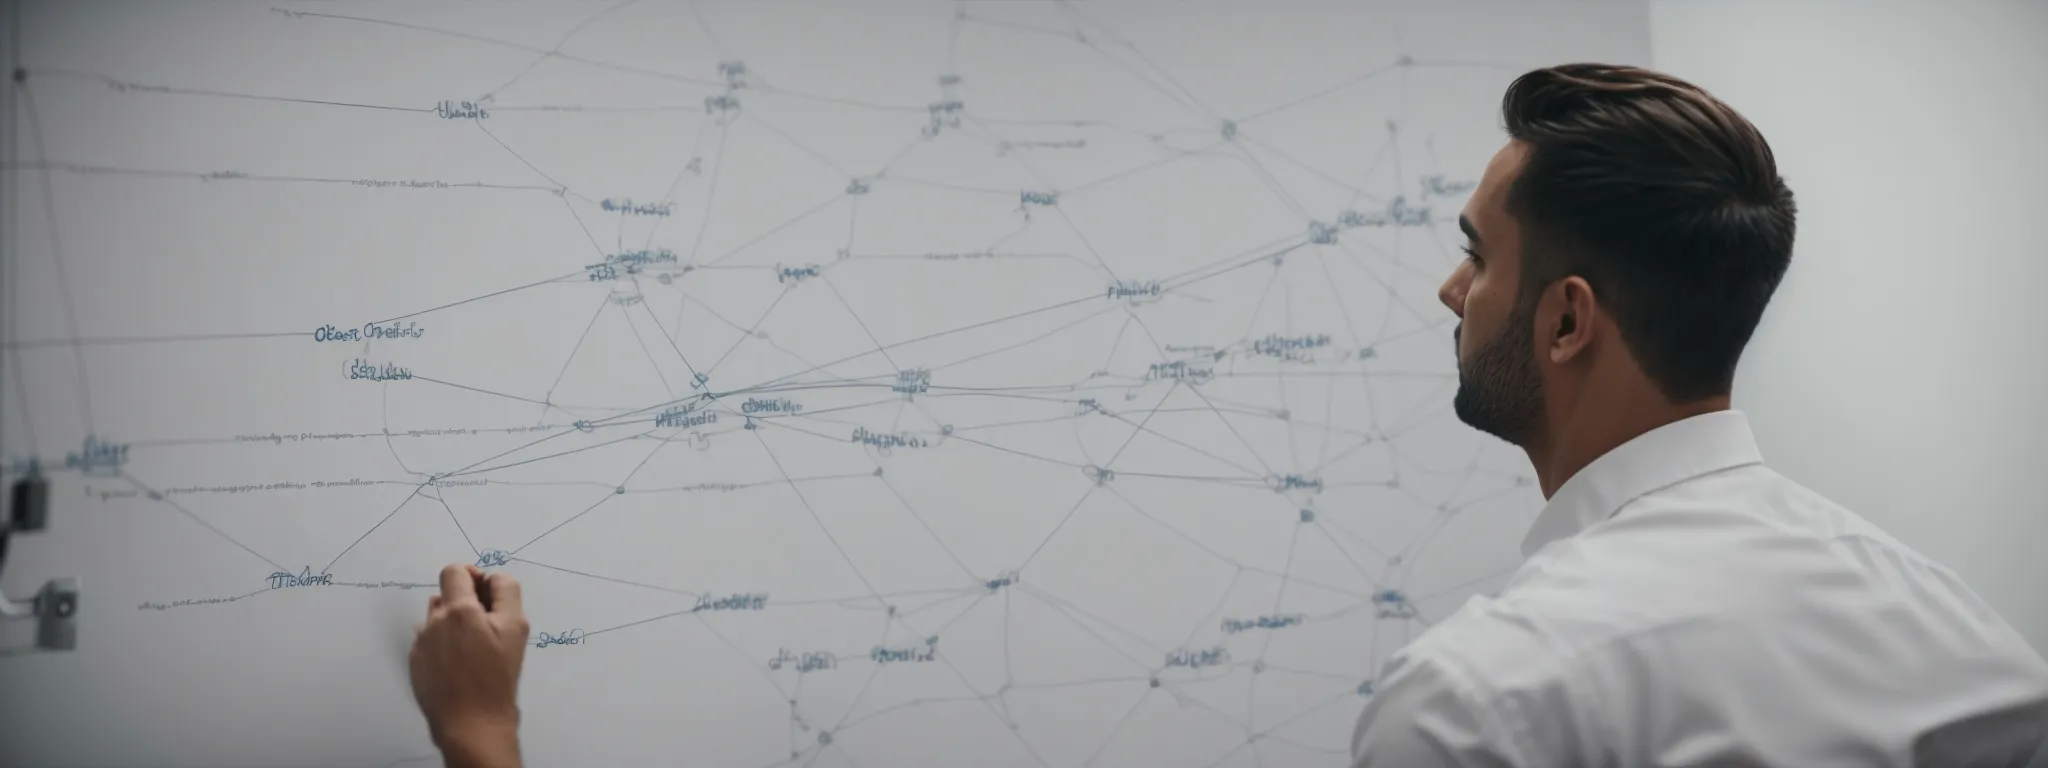 a marketer sketches a web of connections on a whiteboard to symbolize a network of backlinks.